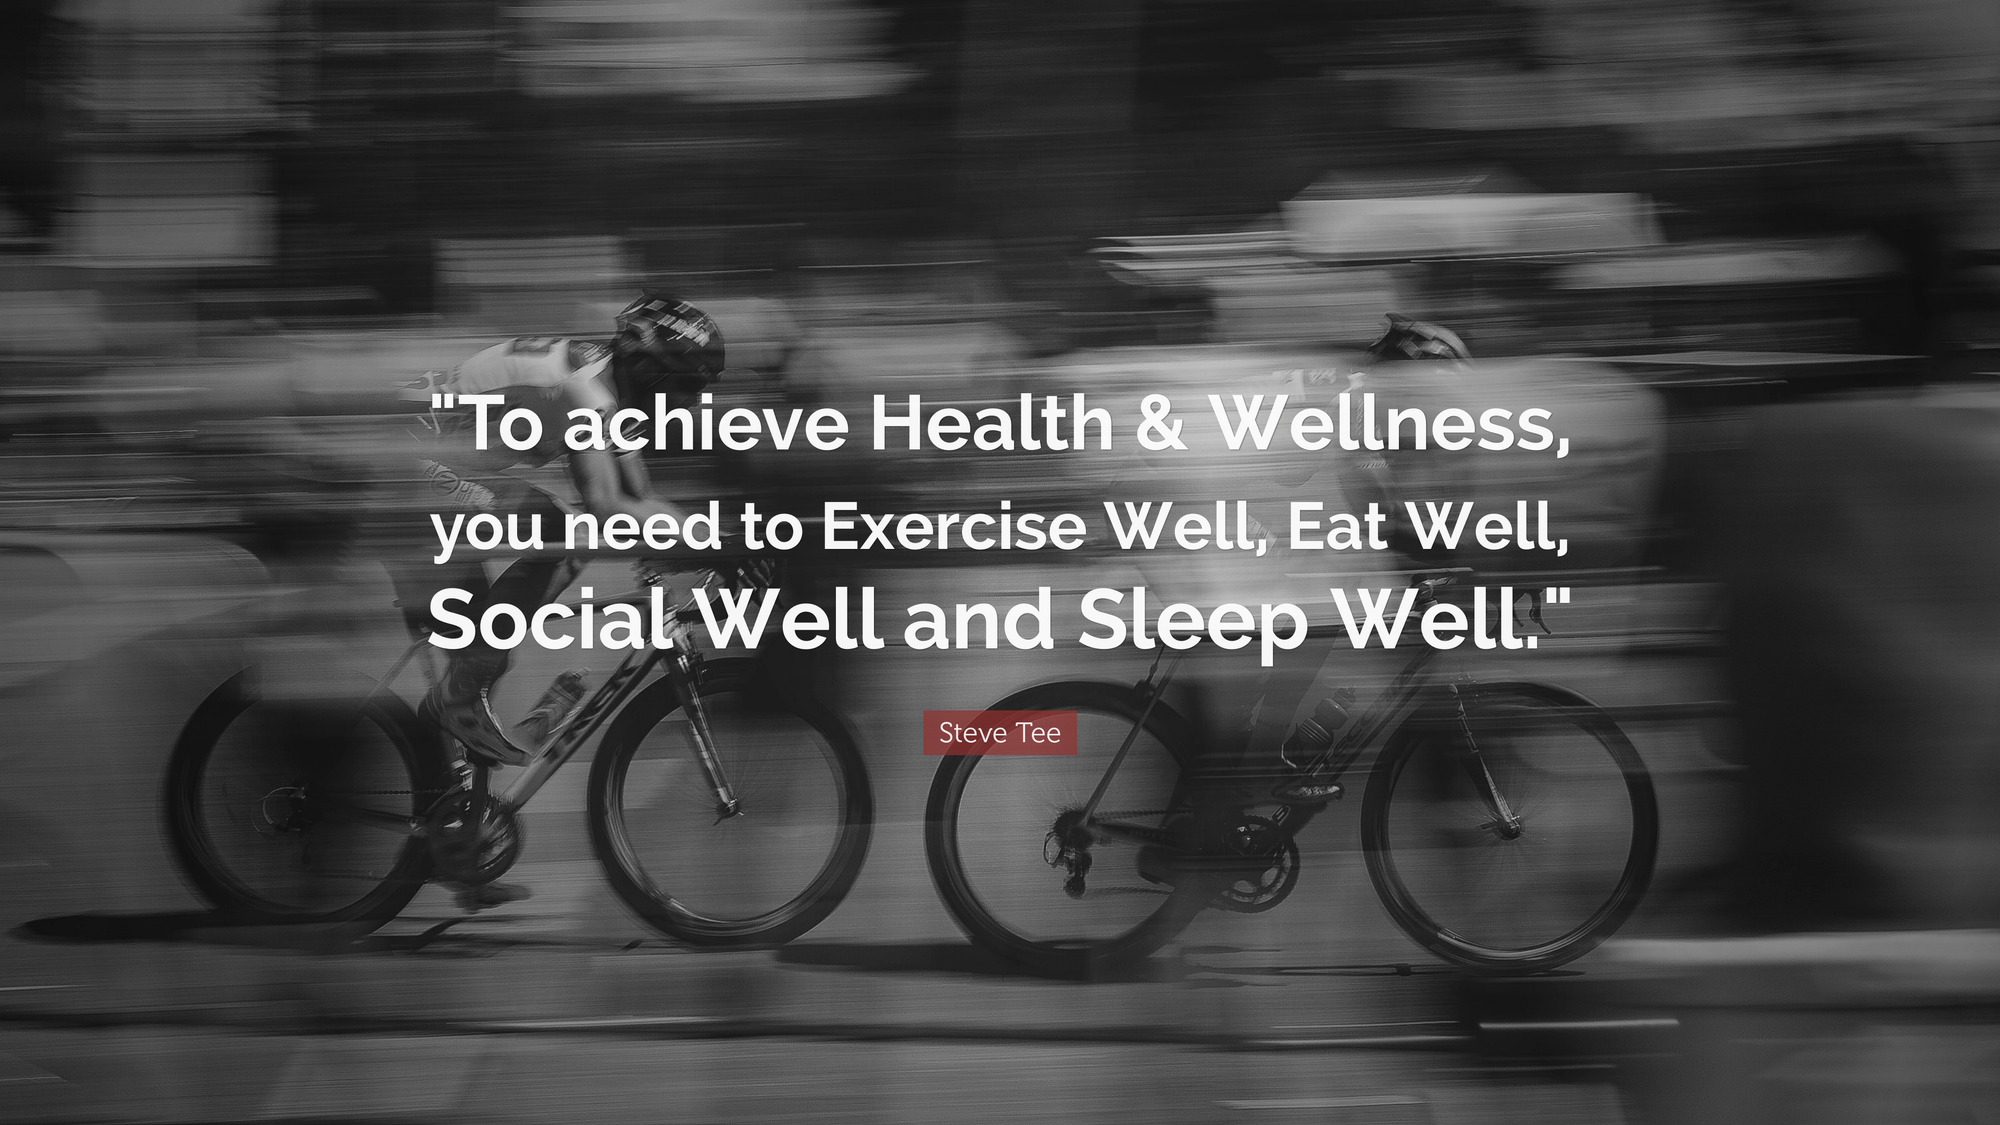 Steve Tee - To achieve Health & Wellness, you need to exercise well, eat well, social well and sleep well.